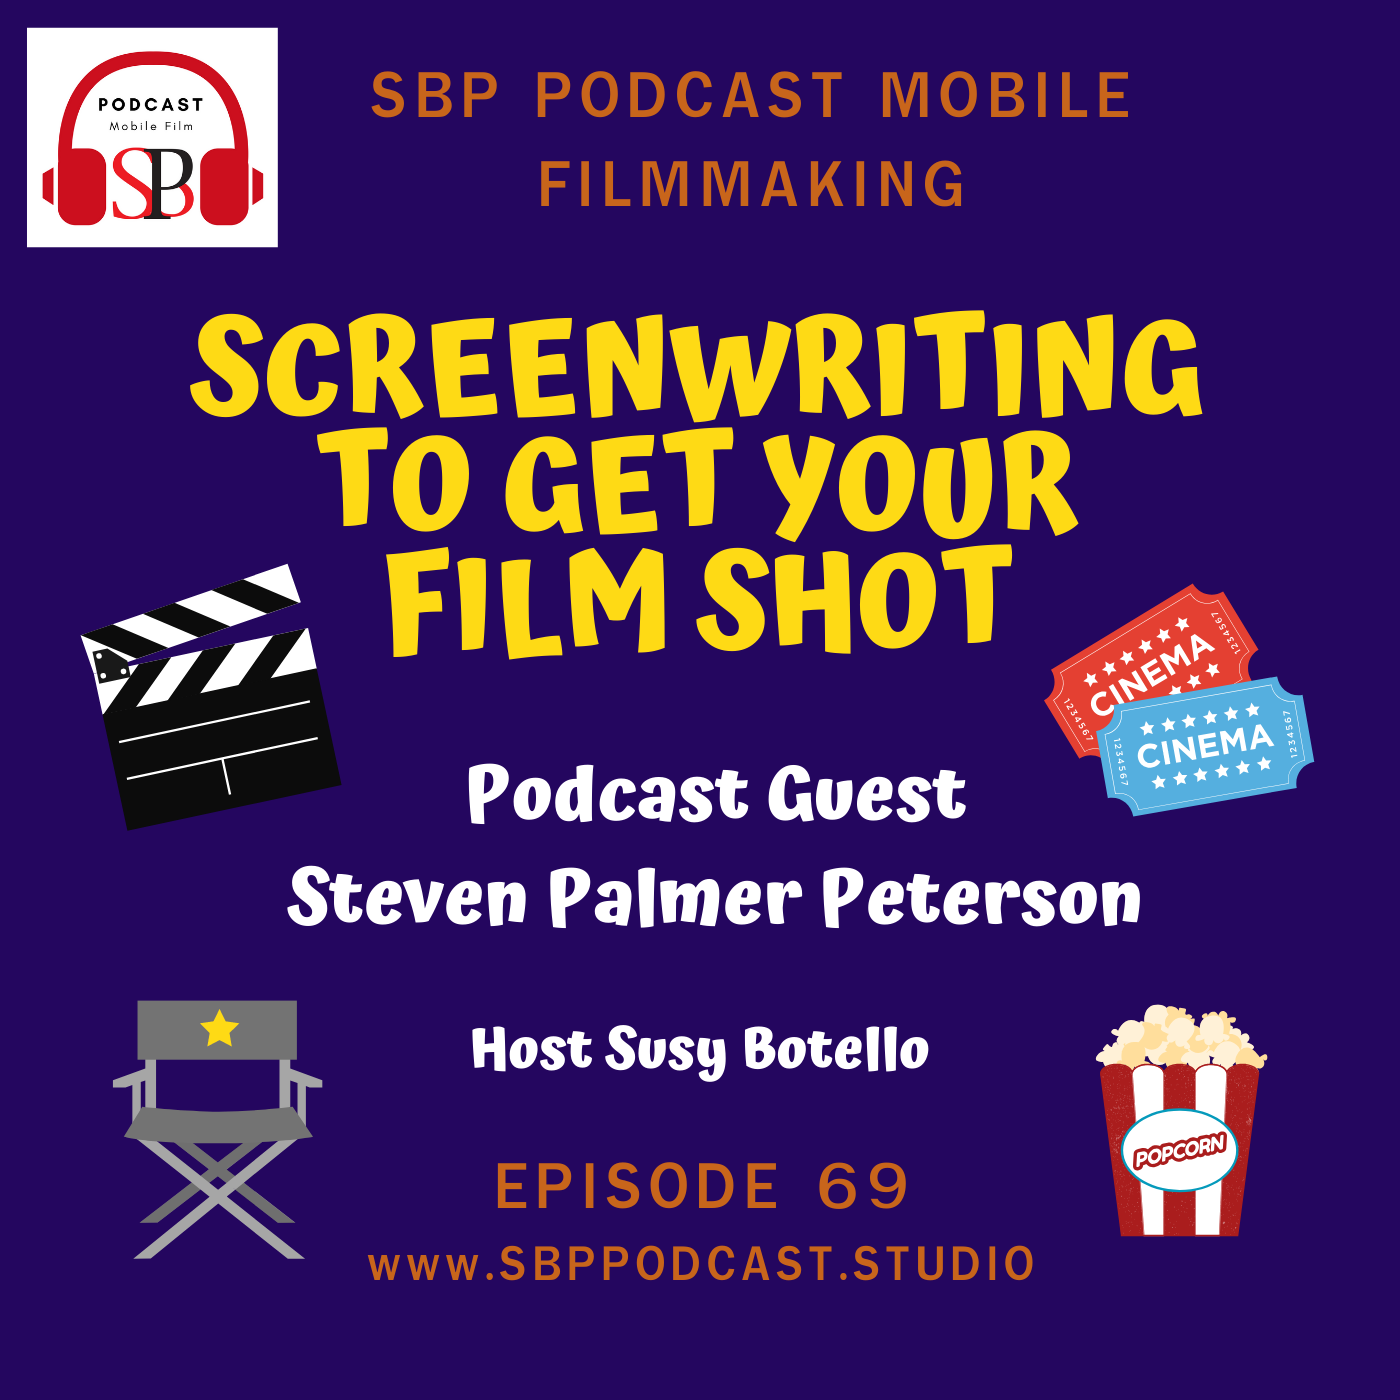 Screenwriting To Get Your Film Shot with Steven Palmer Peterson Image